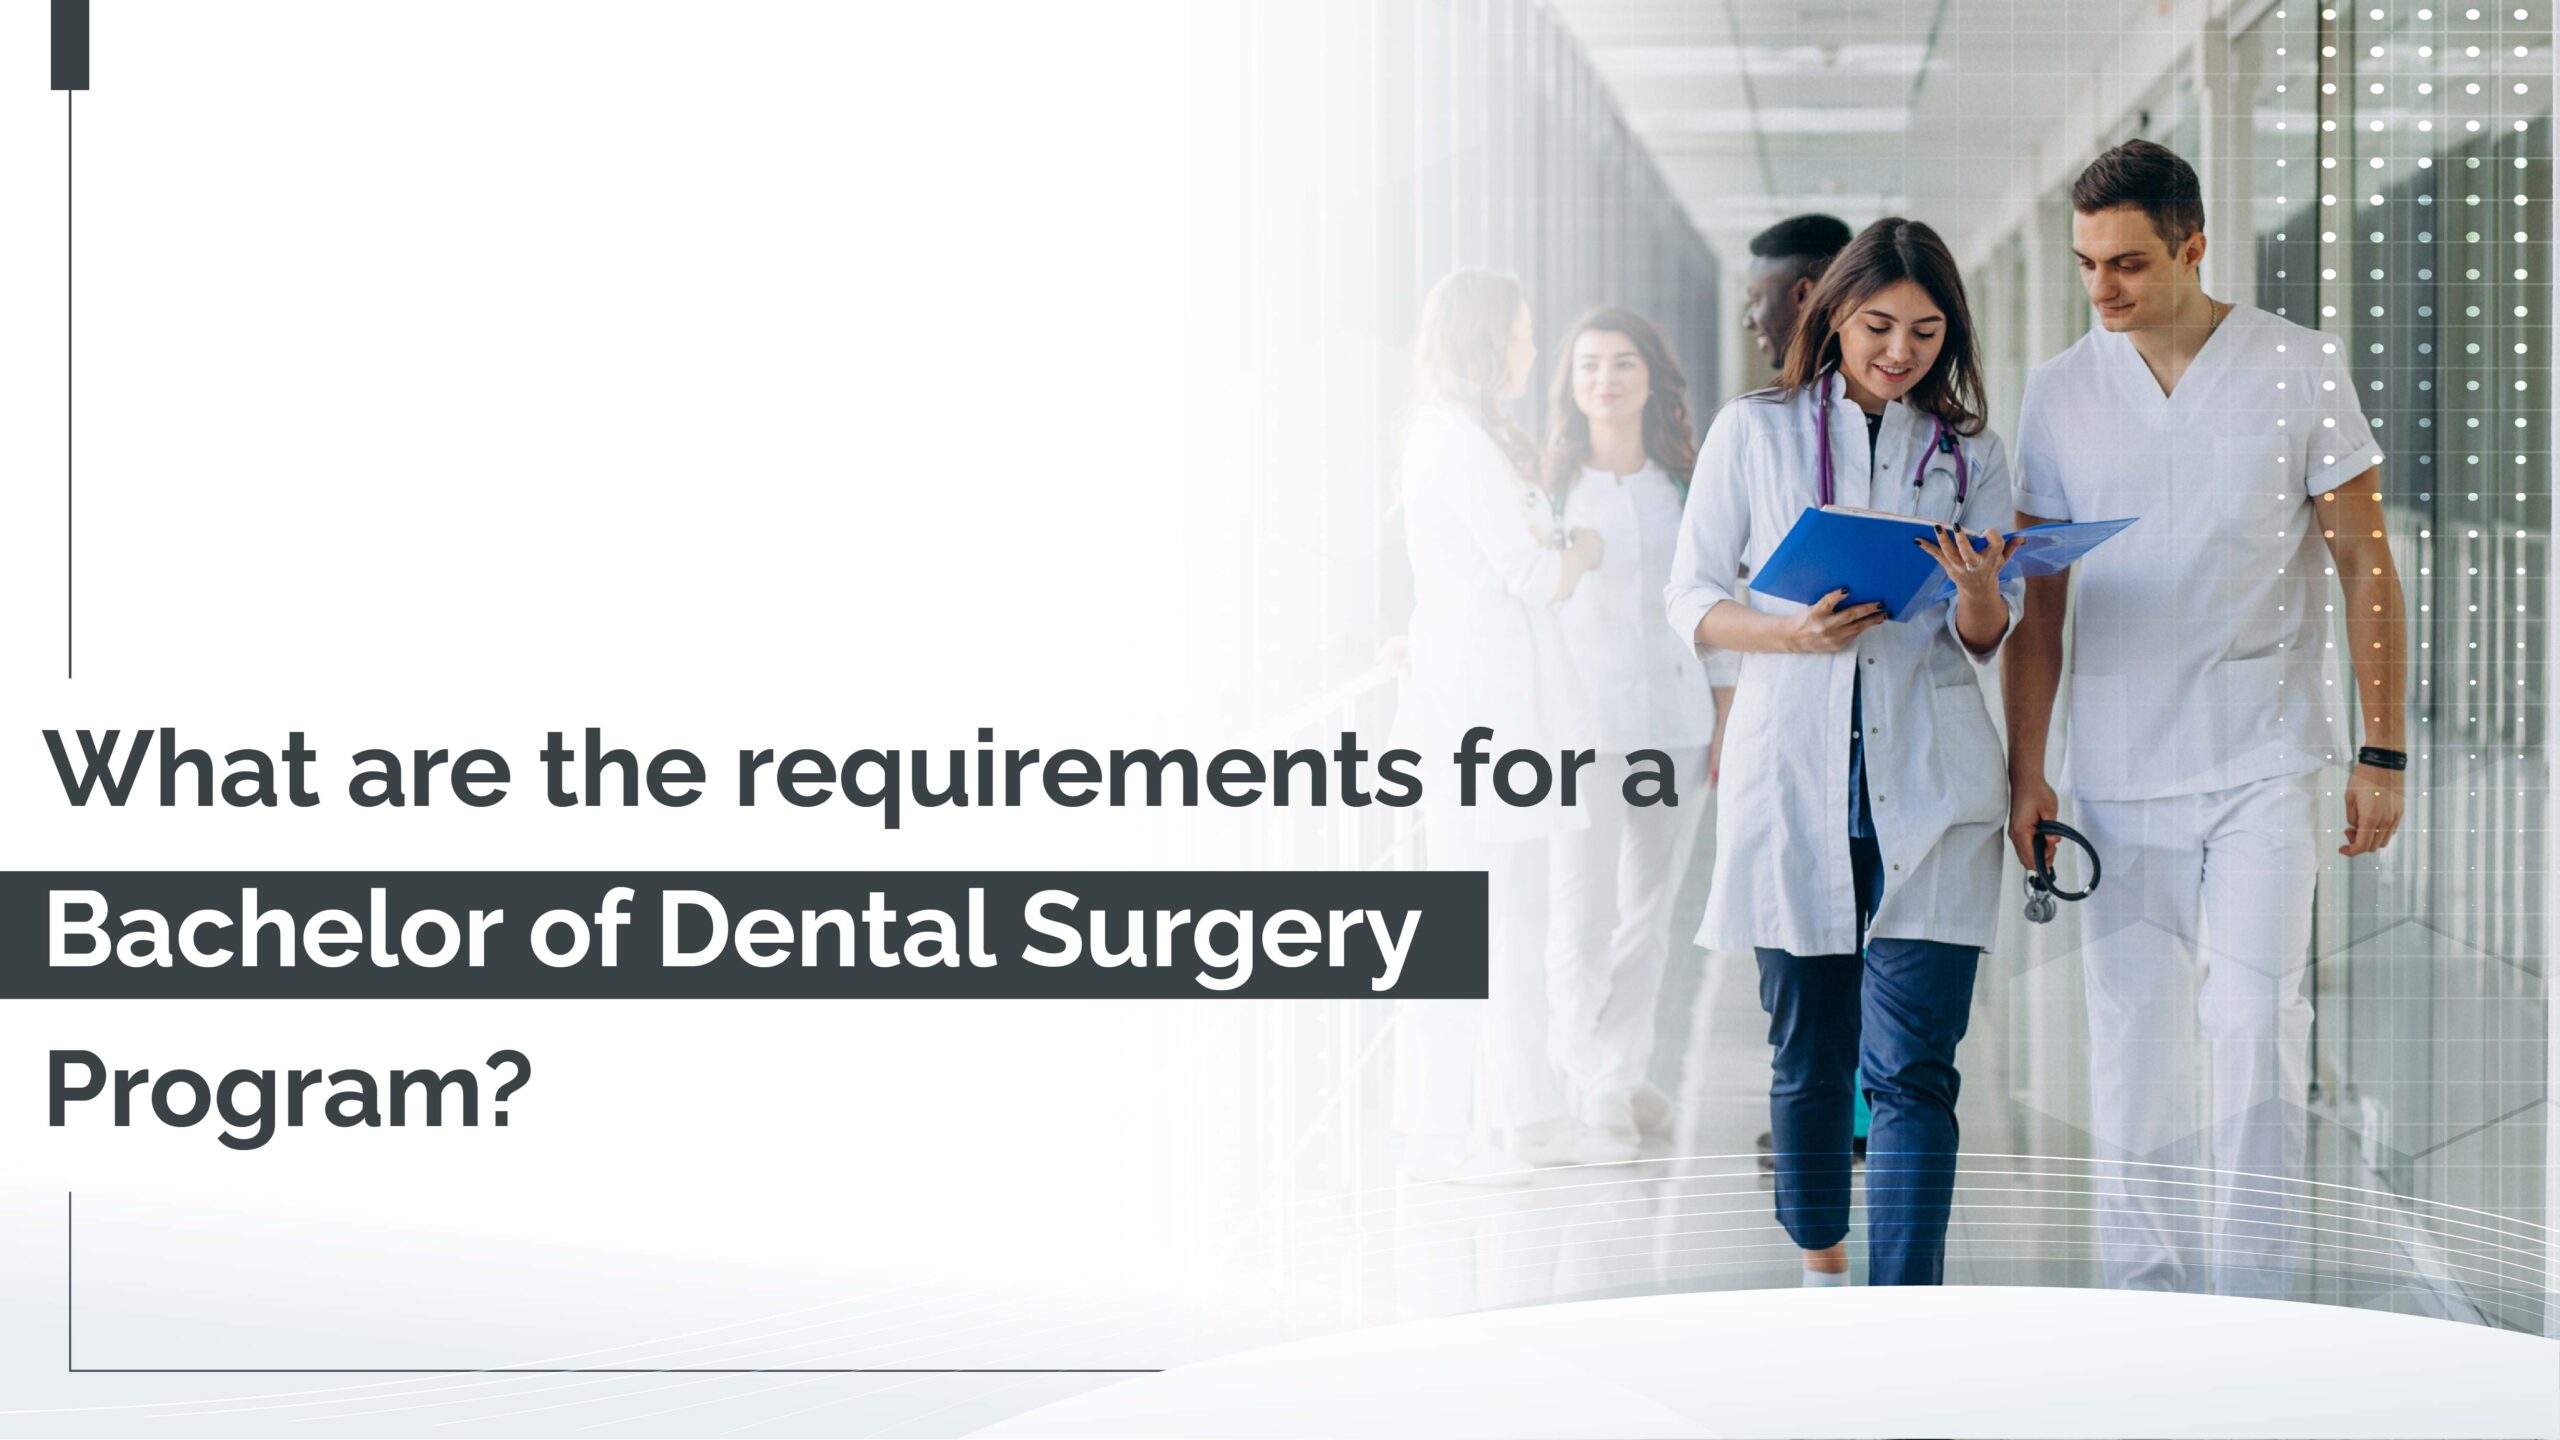 What are the requirements for a Bachelor of Dental Surgery Program